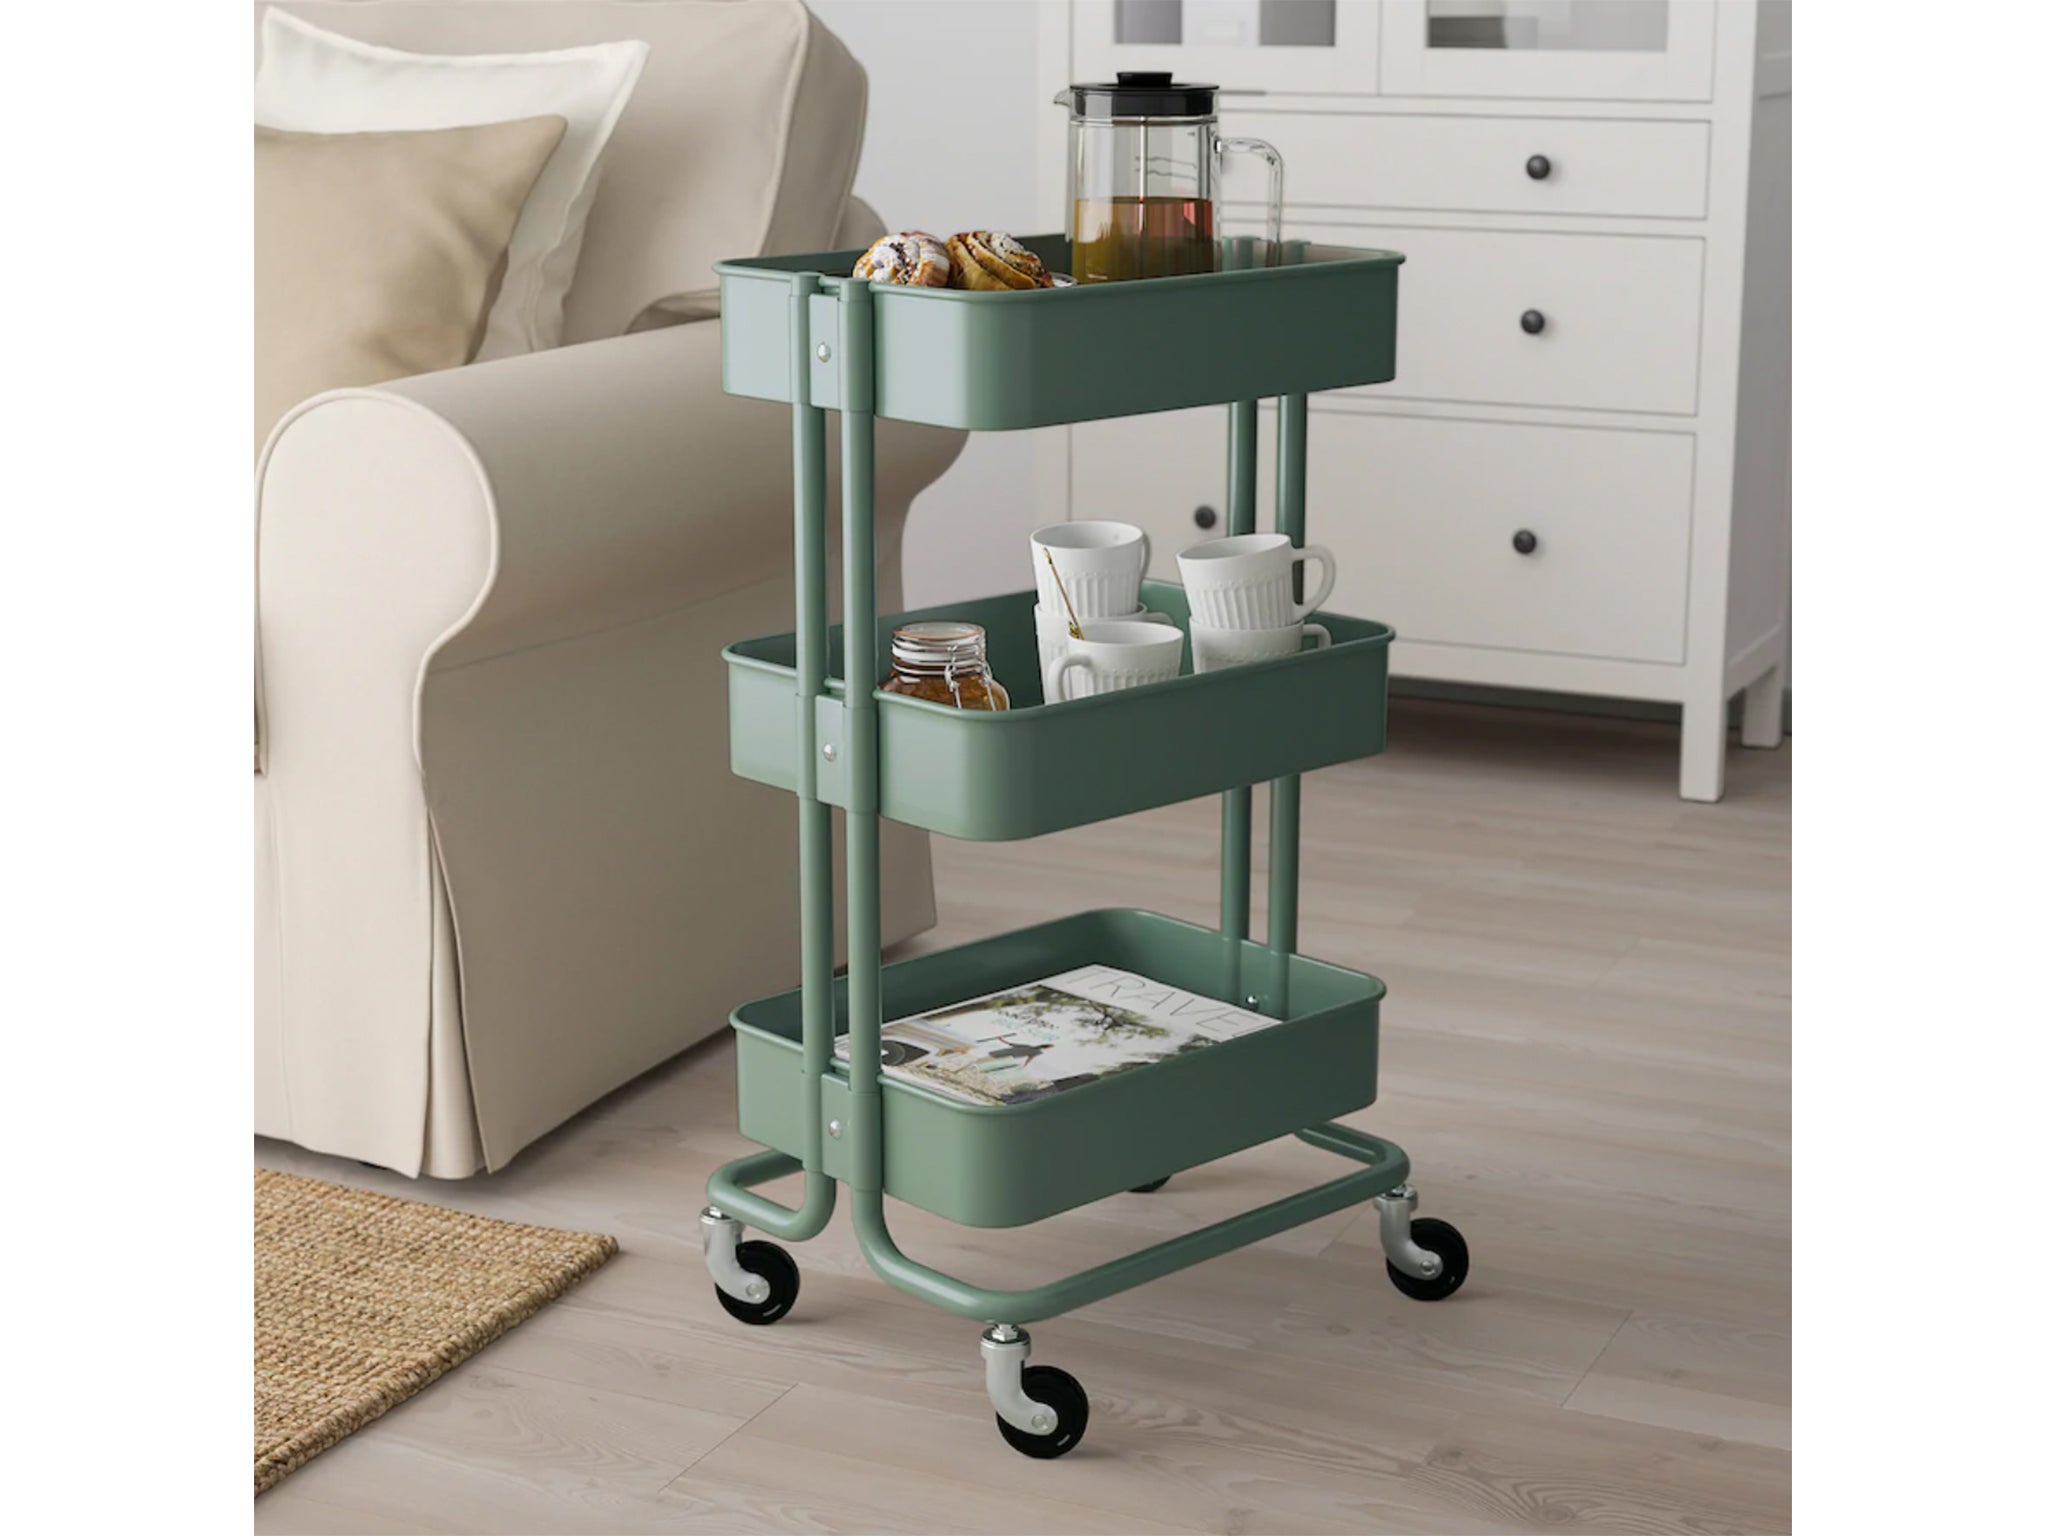 This trolley is a portable storage solution for the bathroom, bedroom, kitchen or living room